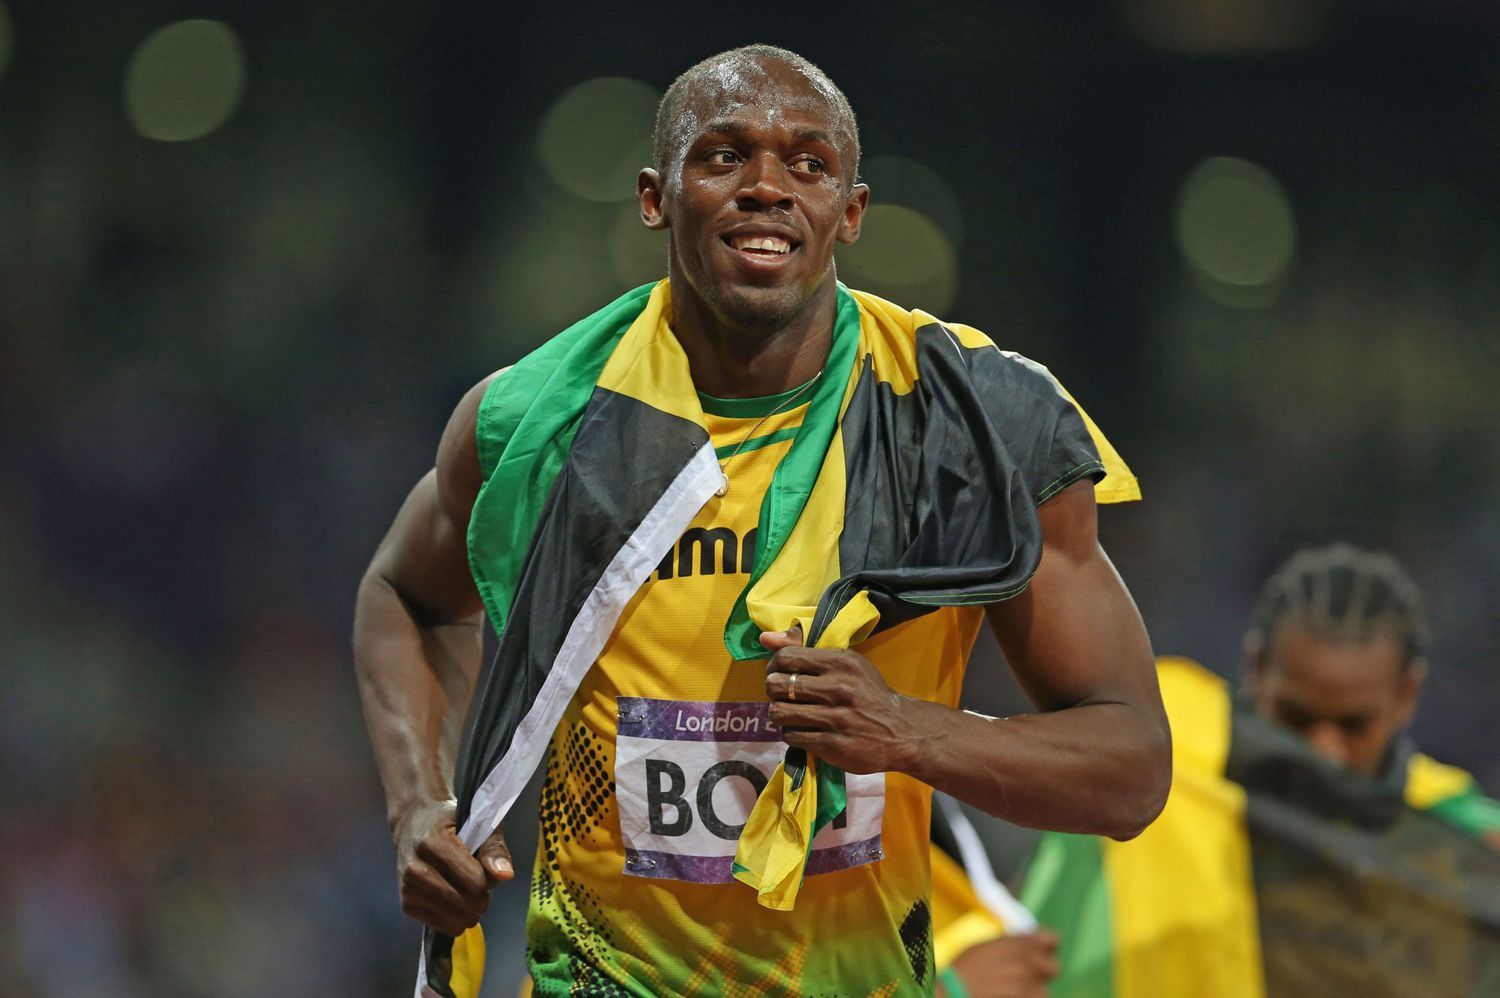 15-mind-blowing-facts-about-usain-bolt